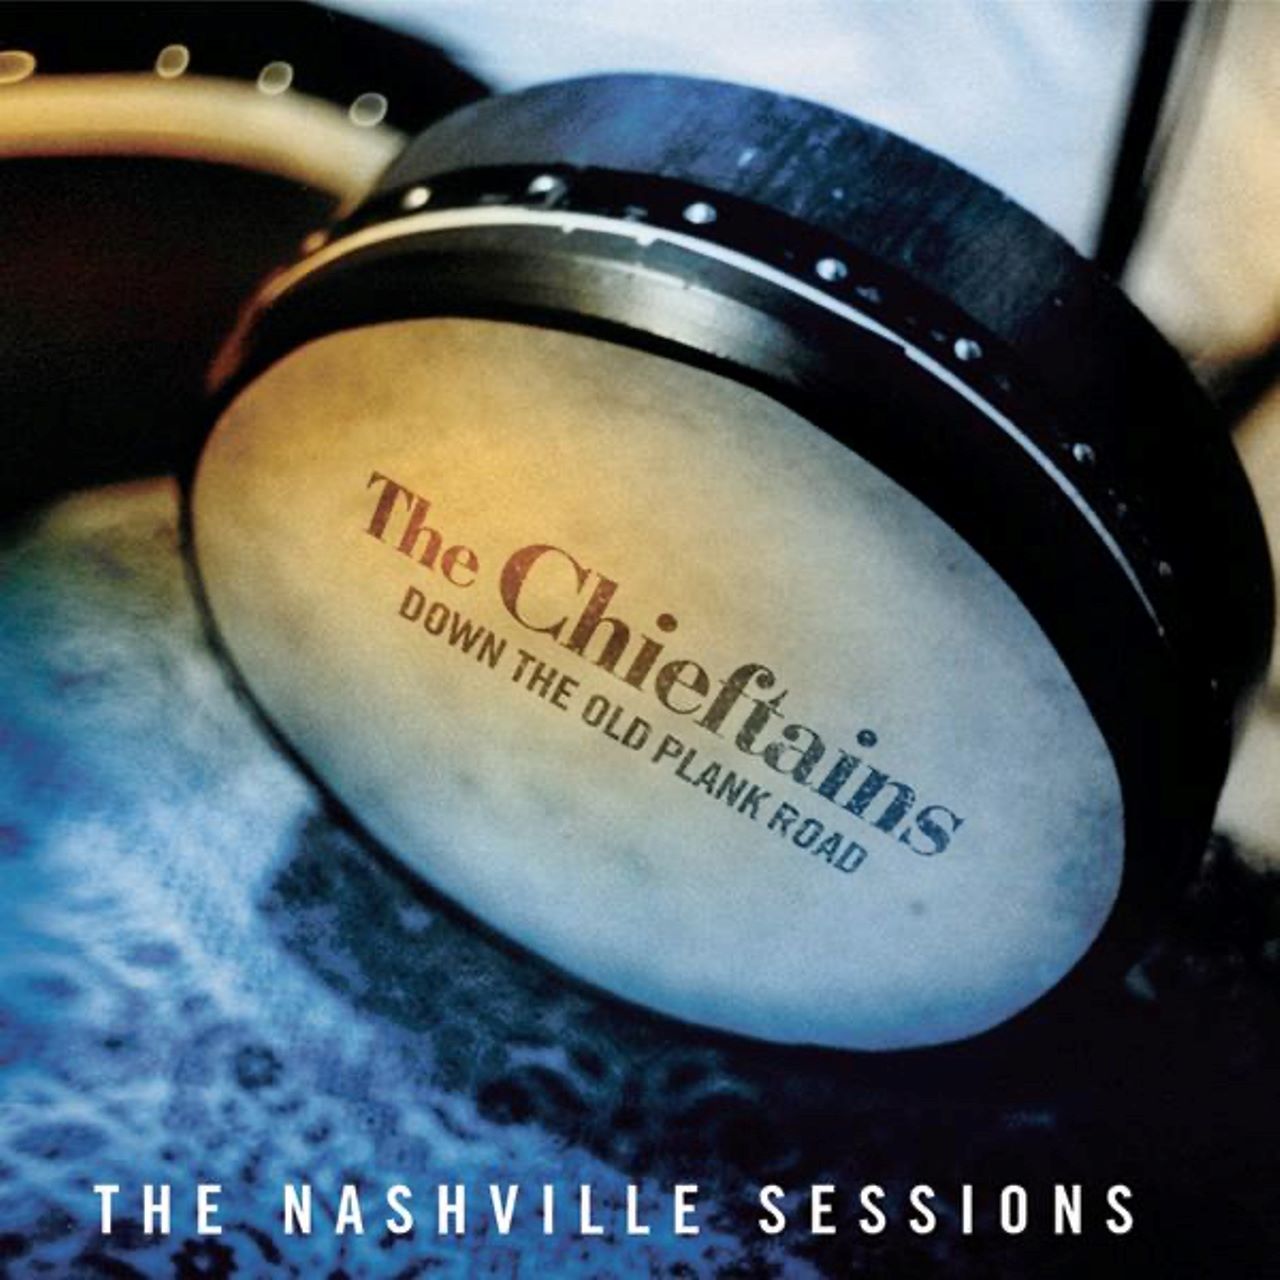 Chieftains - Down The Old Plank Road - The Nashville Sessions cover album